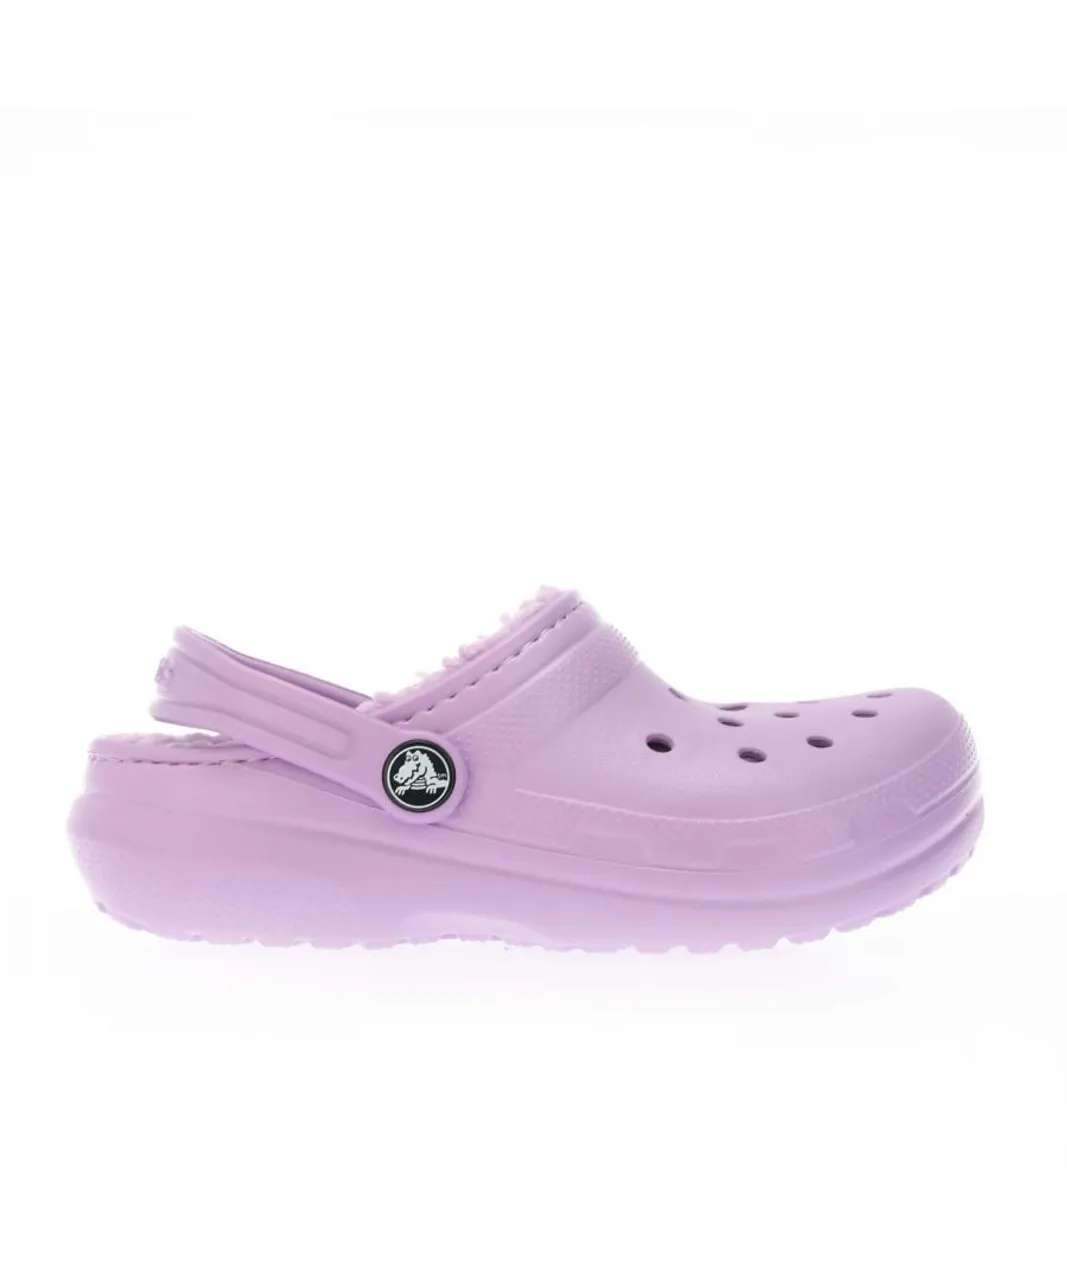 Crocs Girls Girl's Junior Classic Lined Clogs in Purple